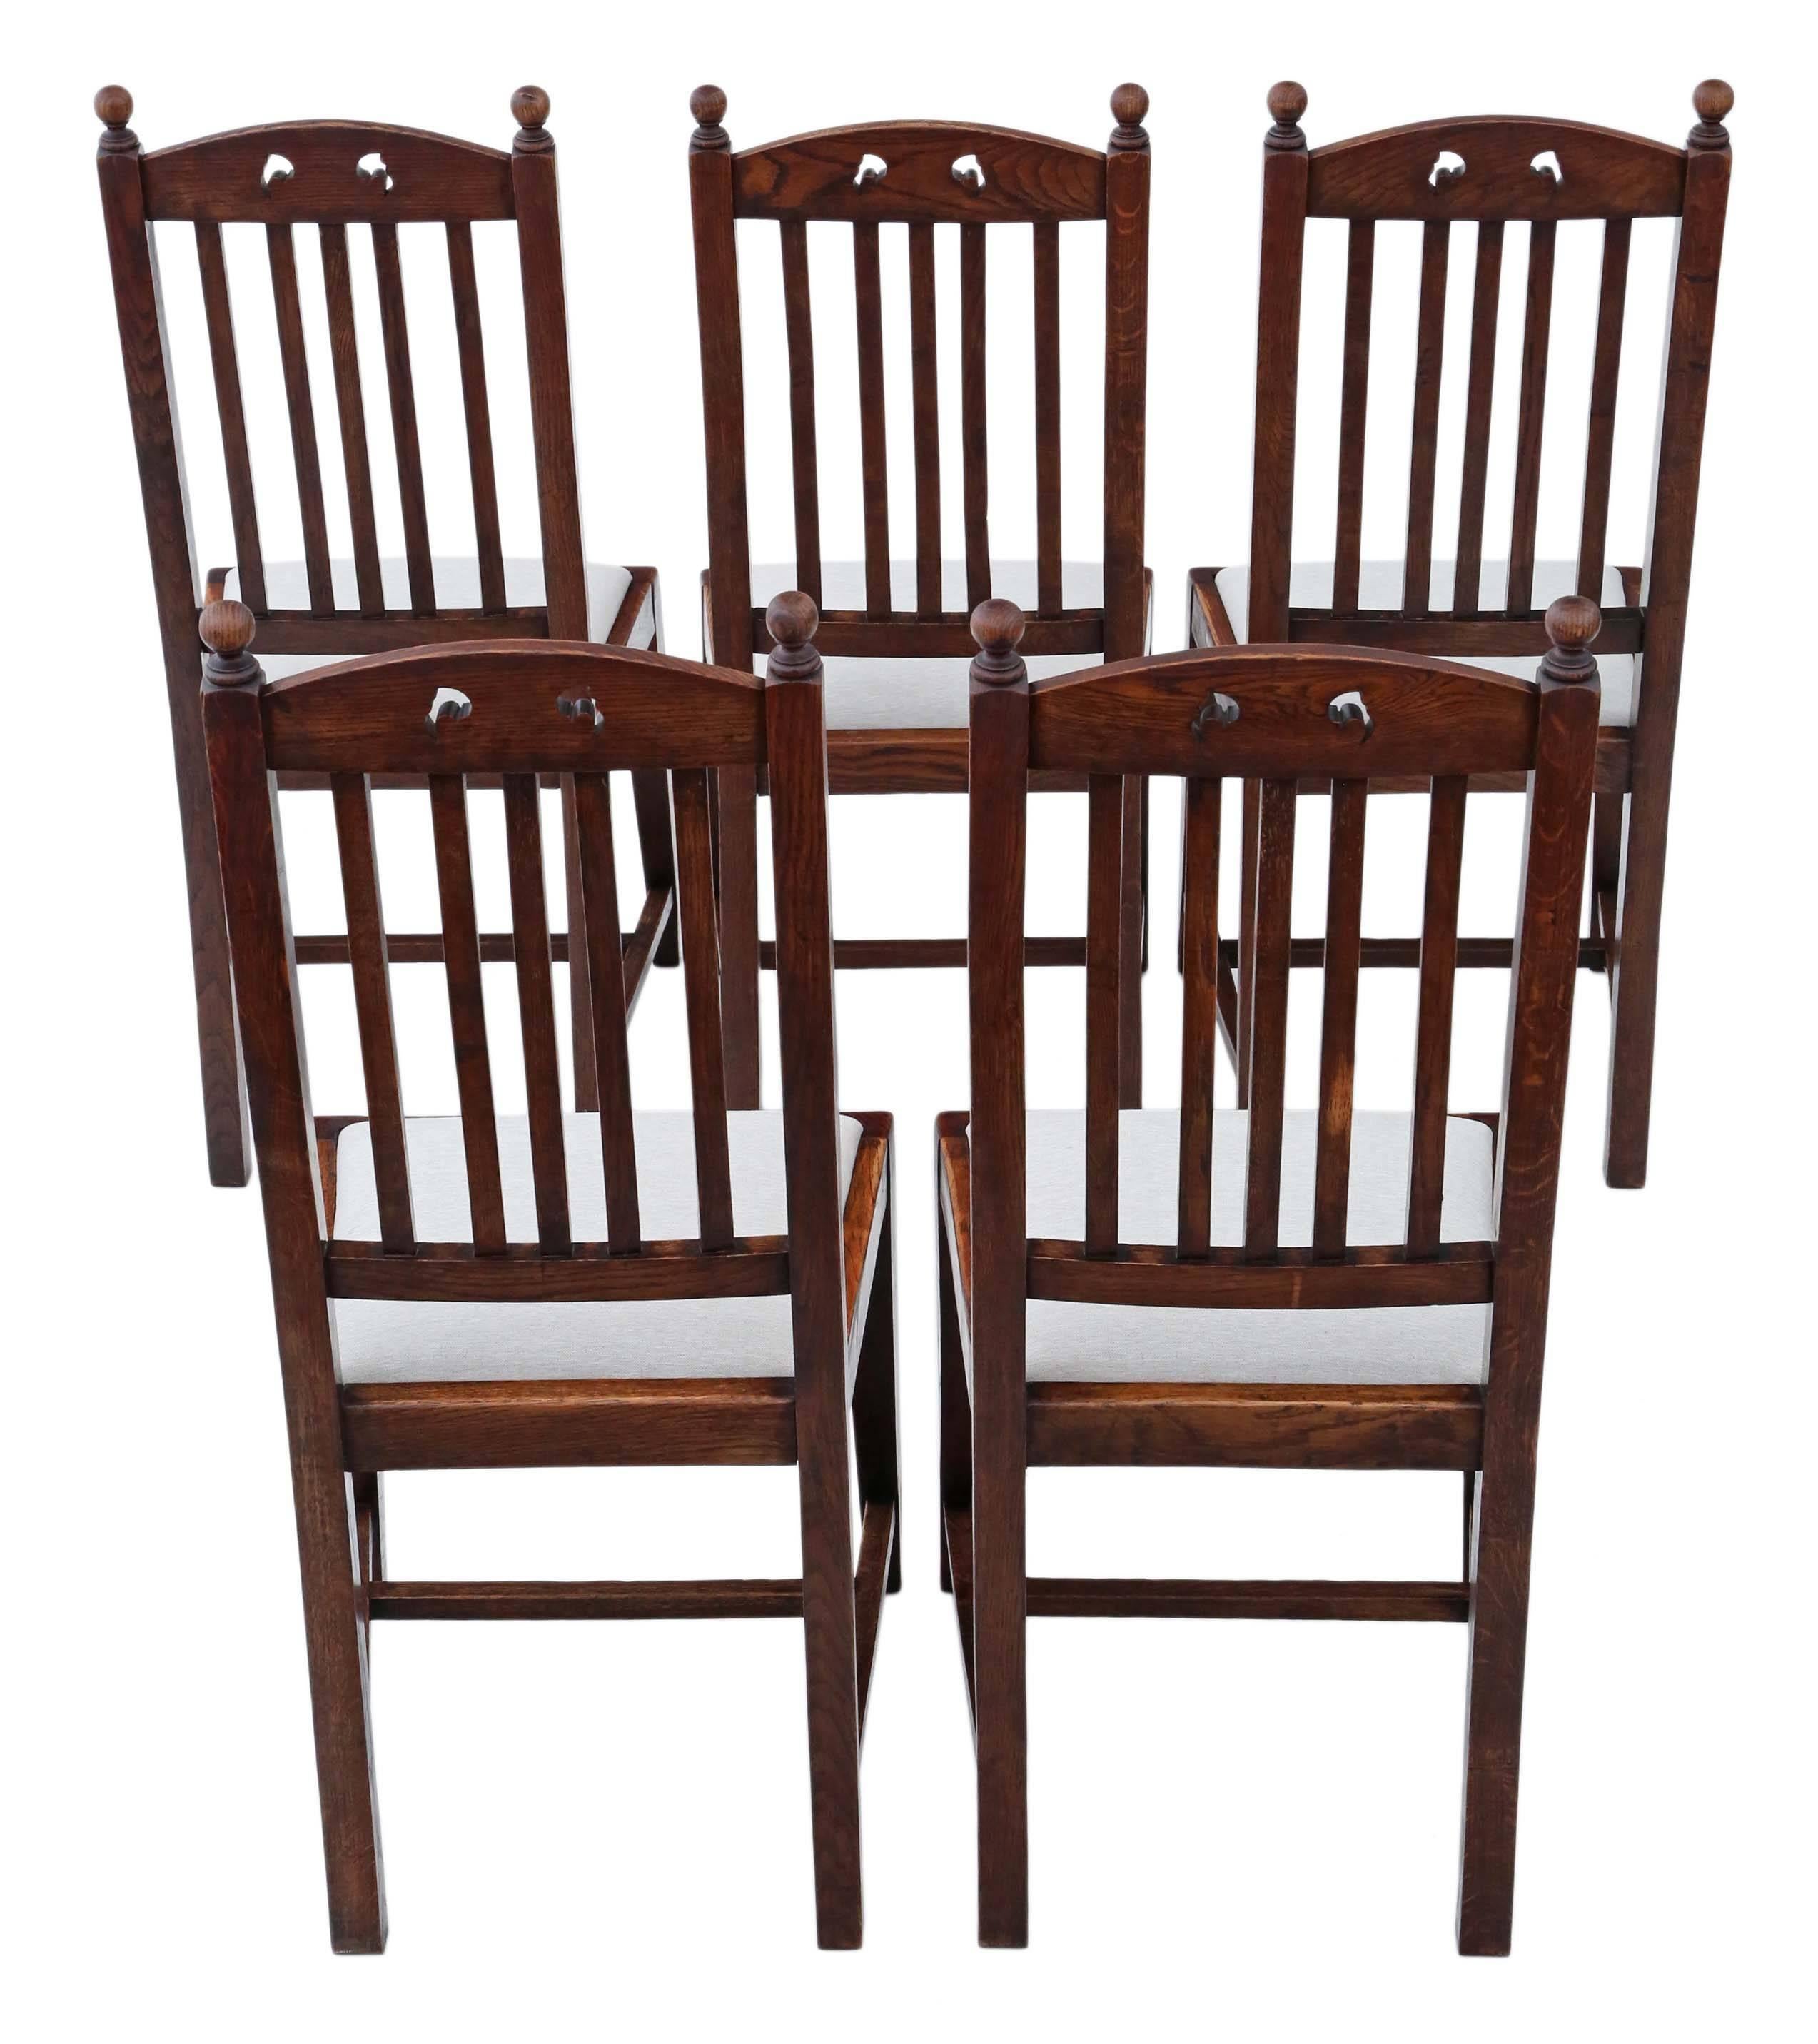 Antique quality set of five oak high back Art Nouveau dining chairs, circa 1900-1920.

Fantastic age, color and patina. Great styling.

Solid and strong with no loose joints. Full of age, charm and character.....a rare find. No woodworm.

Good